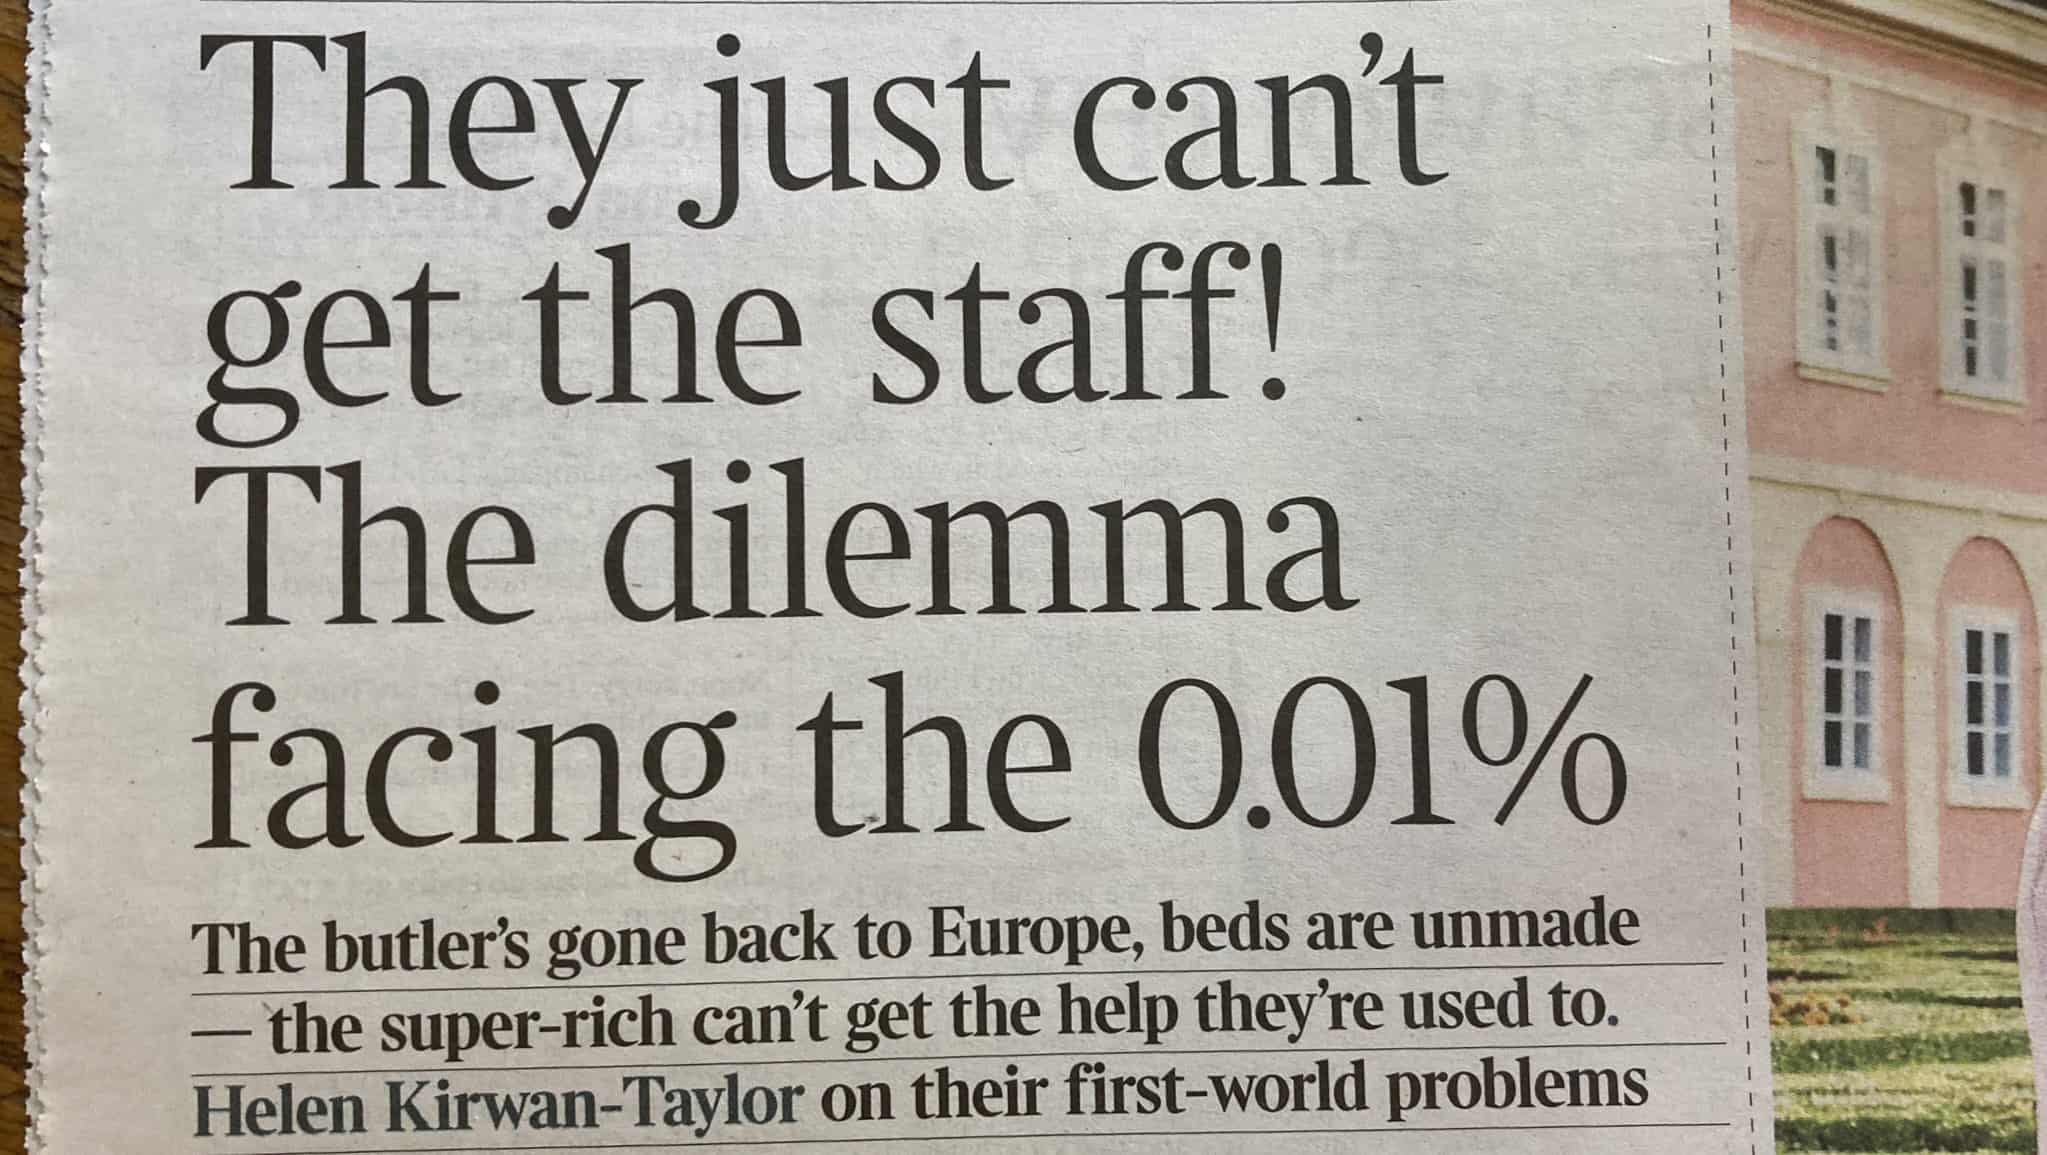 ‘They just can’t get the staff’: Ultra-rich 0.01% in disarray as beds remain unmade and butlers go back to Europe